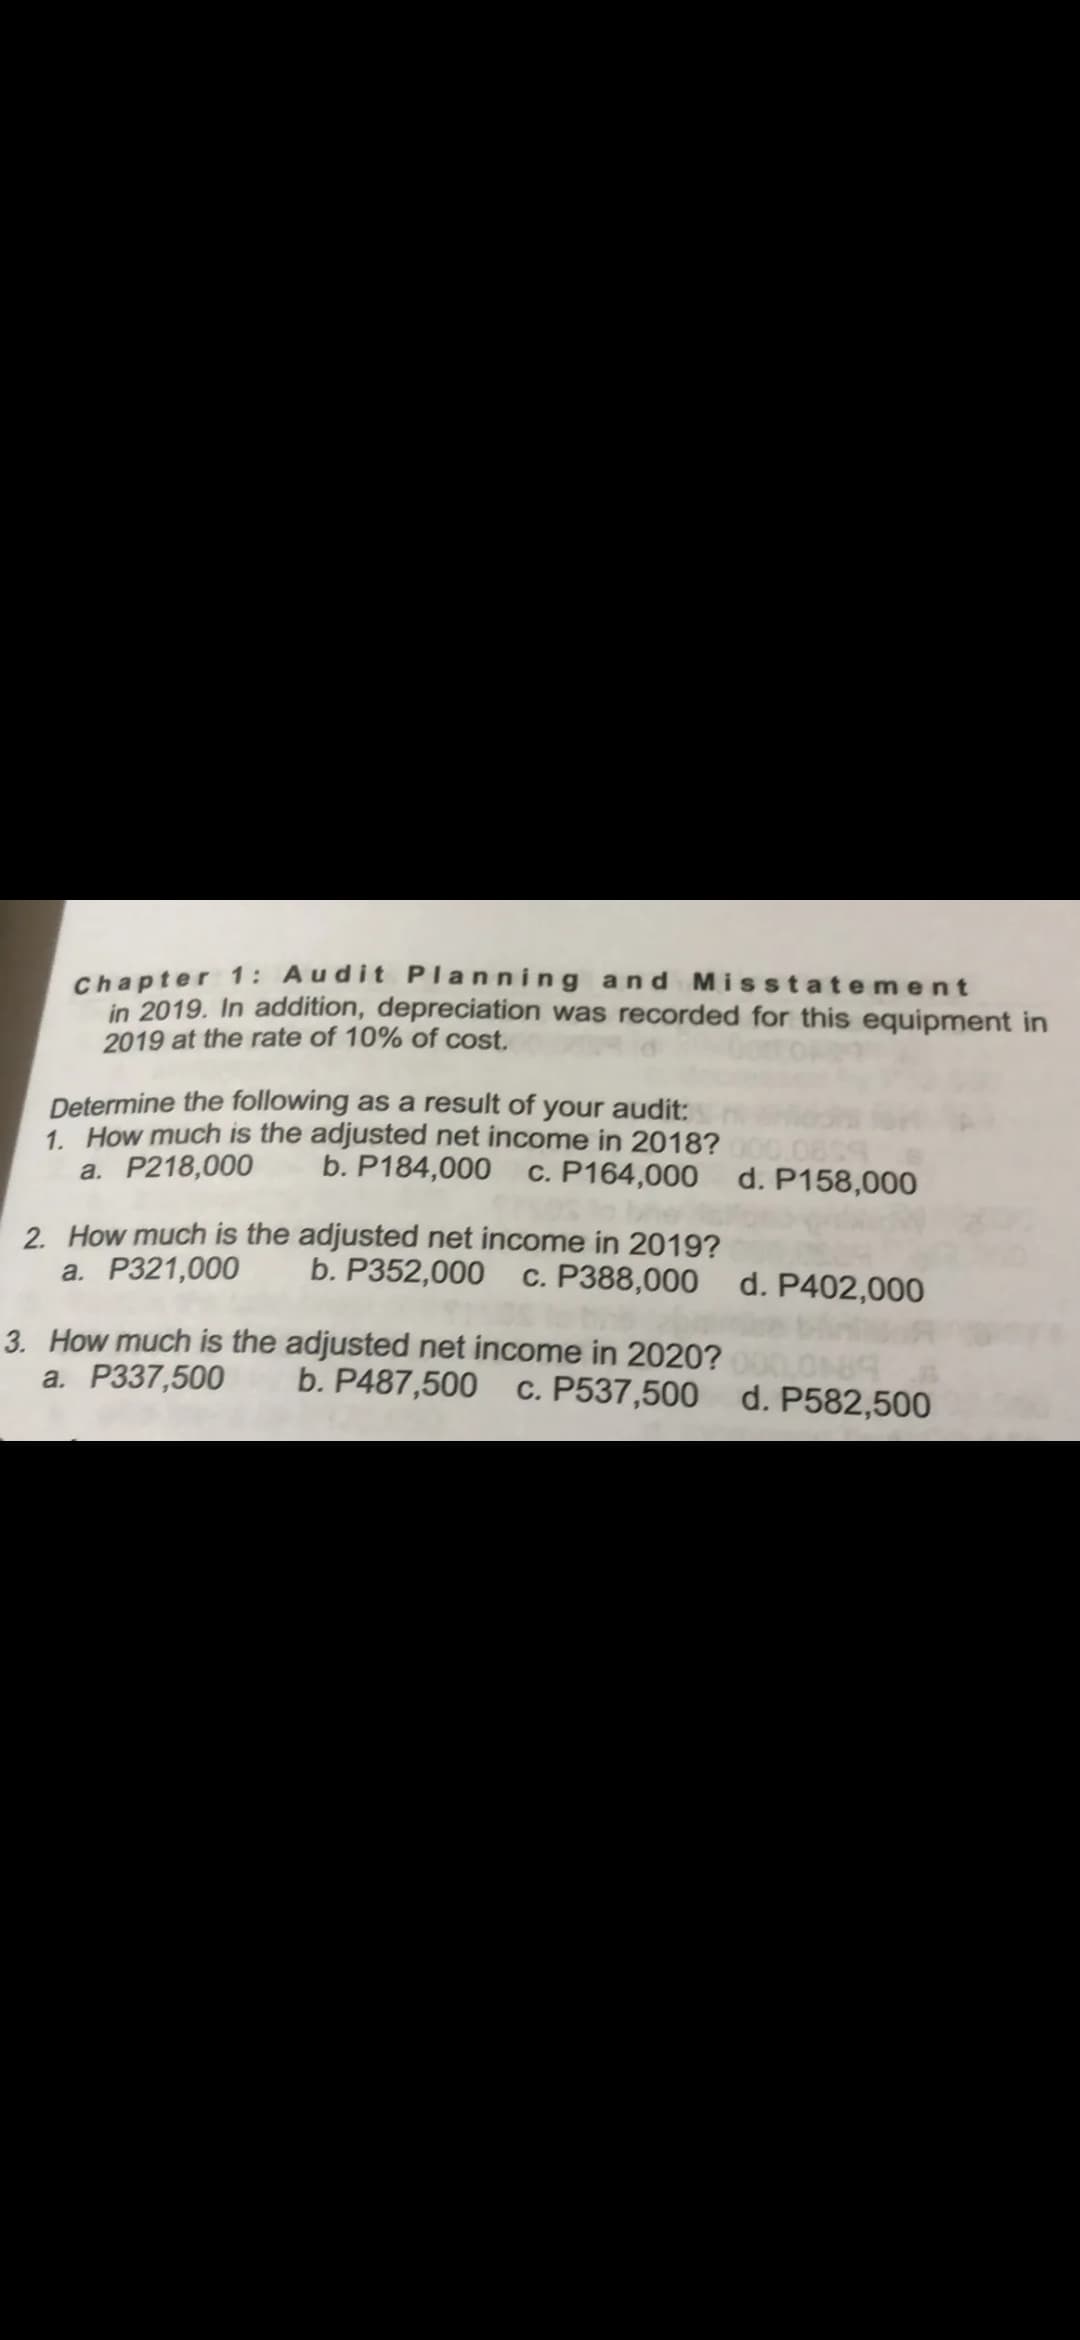 Chapter 1: Audit Planning and Misstatement
in 2019. In addition, depreciation was recorded for this equipment in
2019 at the rate of 10% of cost.
Determine the following as a result of your audit:
1. How much is the adjusted net income in 2018?
a. P218,000
b. P184,000
c. P164,000 d. P158,000
2. How much is the adjusted net income in 2019?
a. P321,000
b. P352,000
c. P388,000 d. P402,000
3. How much is the adjusted net income in 2020?
a. P337,500
LON
c. P537,500 d. P582,500
b. P487,500
